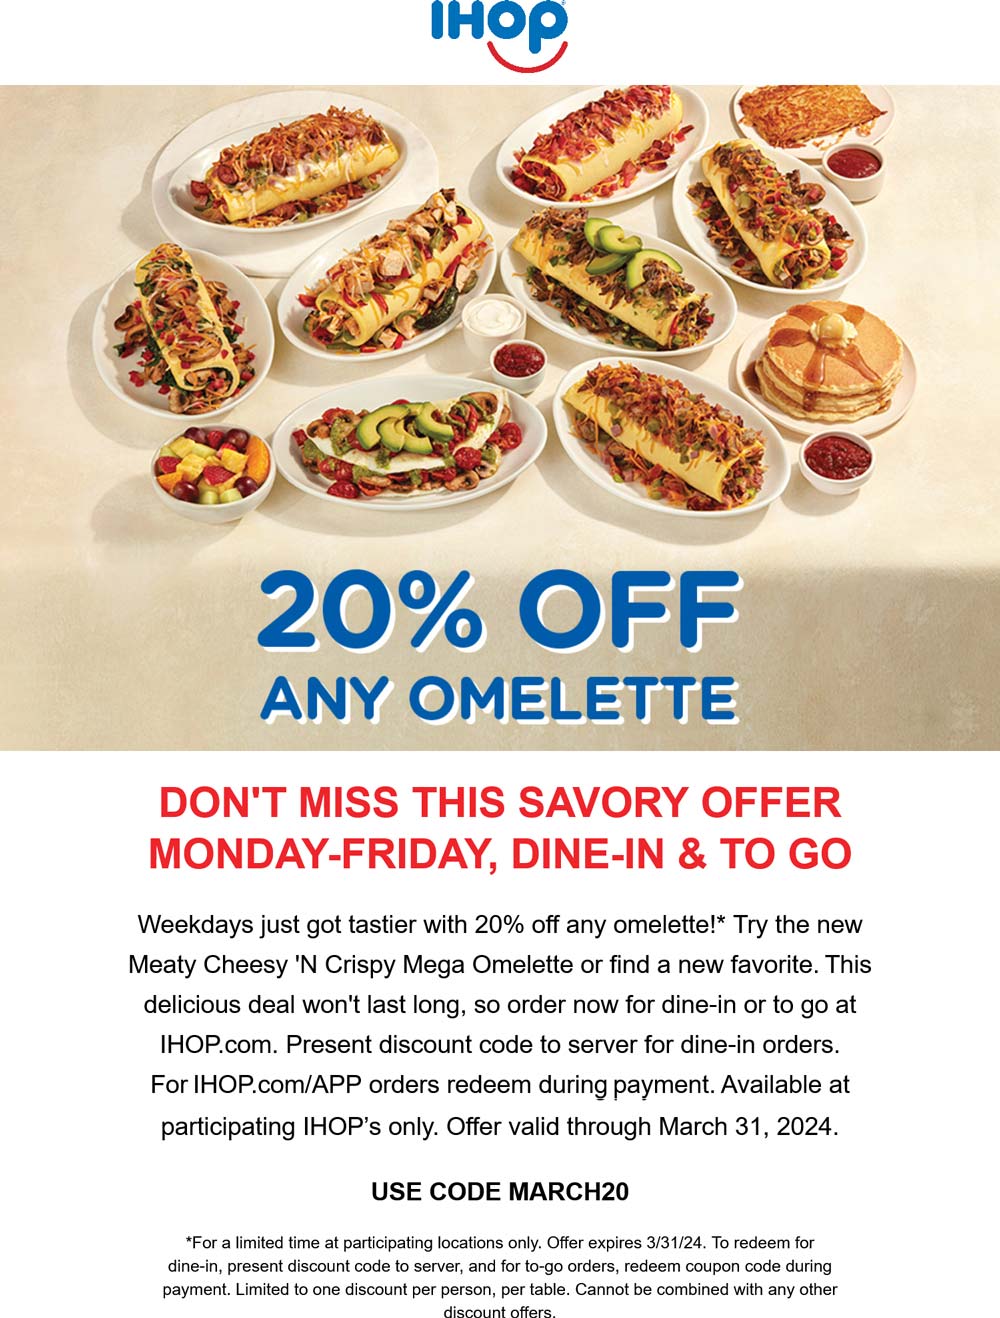 IHOP stores Coupon  20% off any omelette weekdays at IHOP via promo code MARCH20 #ihop 